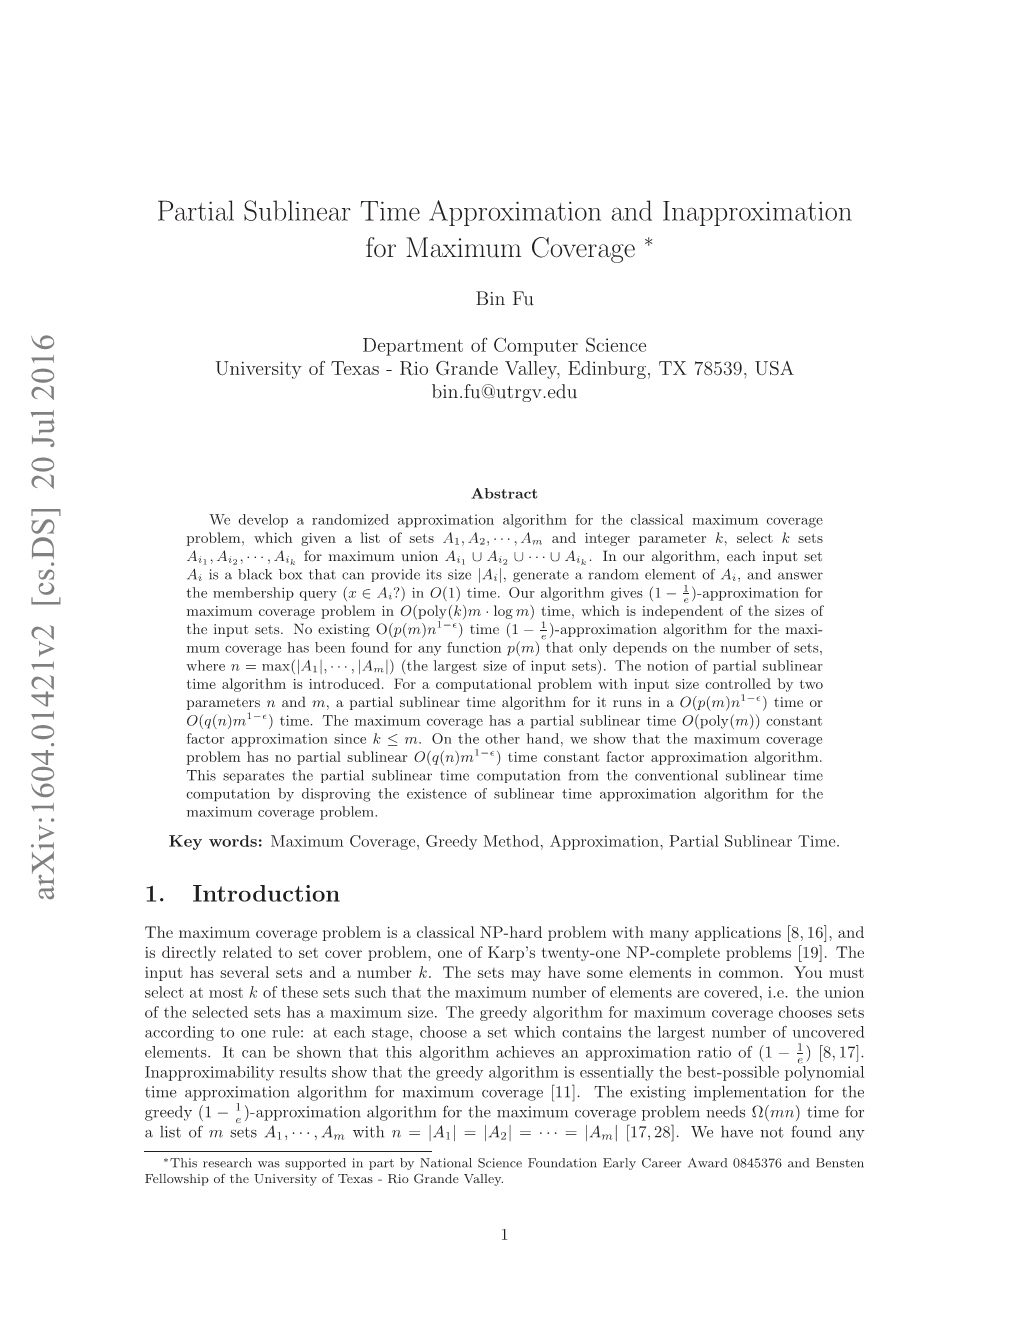 Partial Sublinear Time Approximation and Inapproximation for Maximum